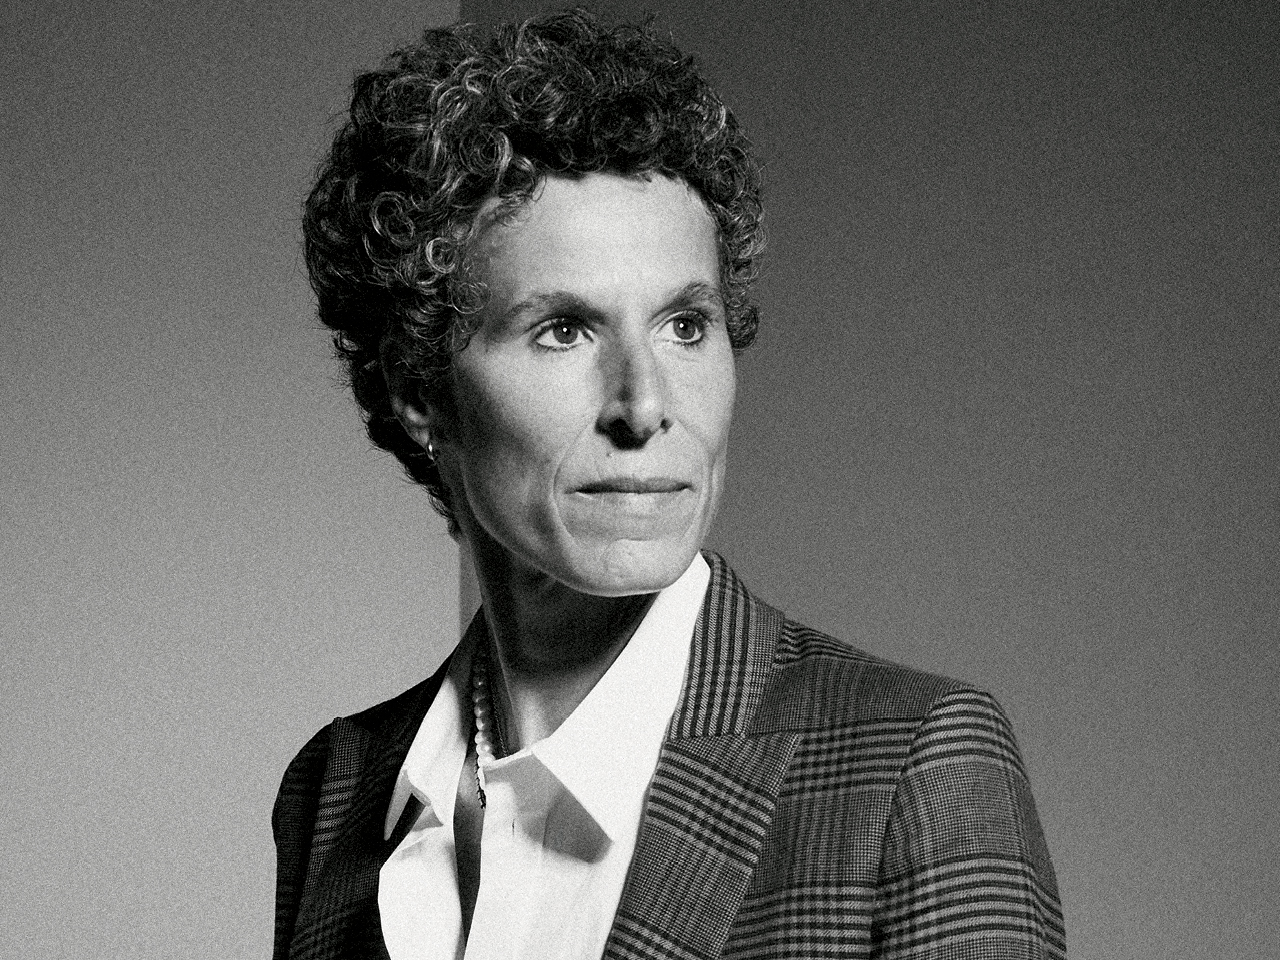 A black-and-white photograph of Andrea Constand